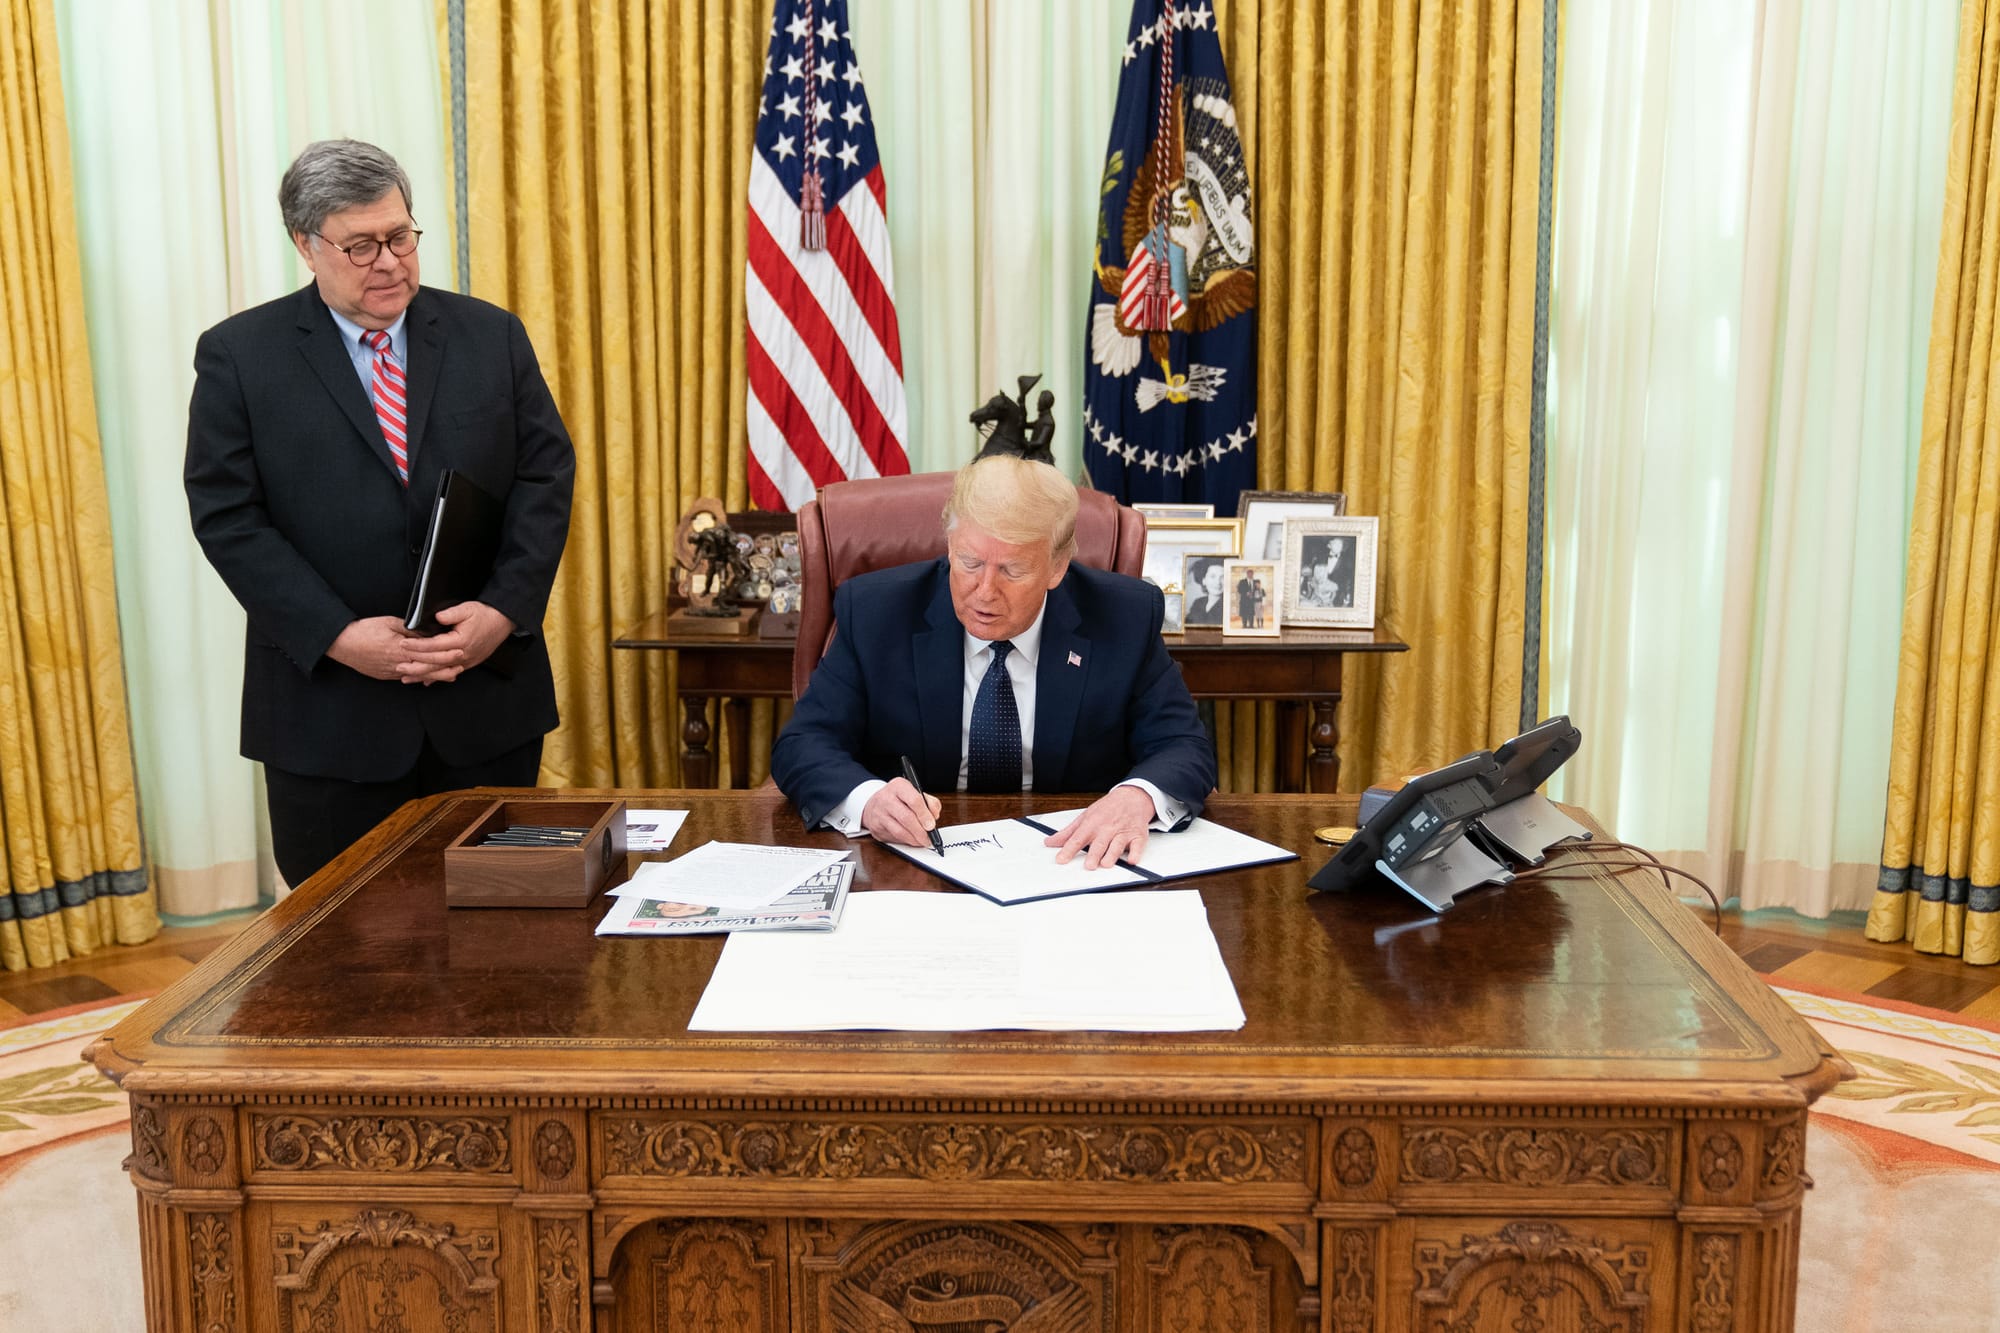 White House photo of Trump and AG Bill Barr in 2020